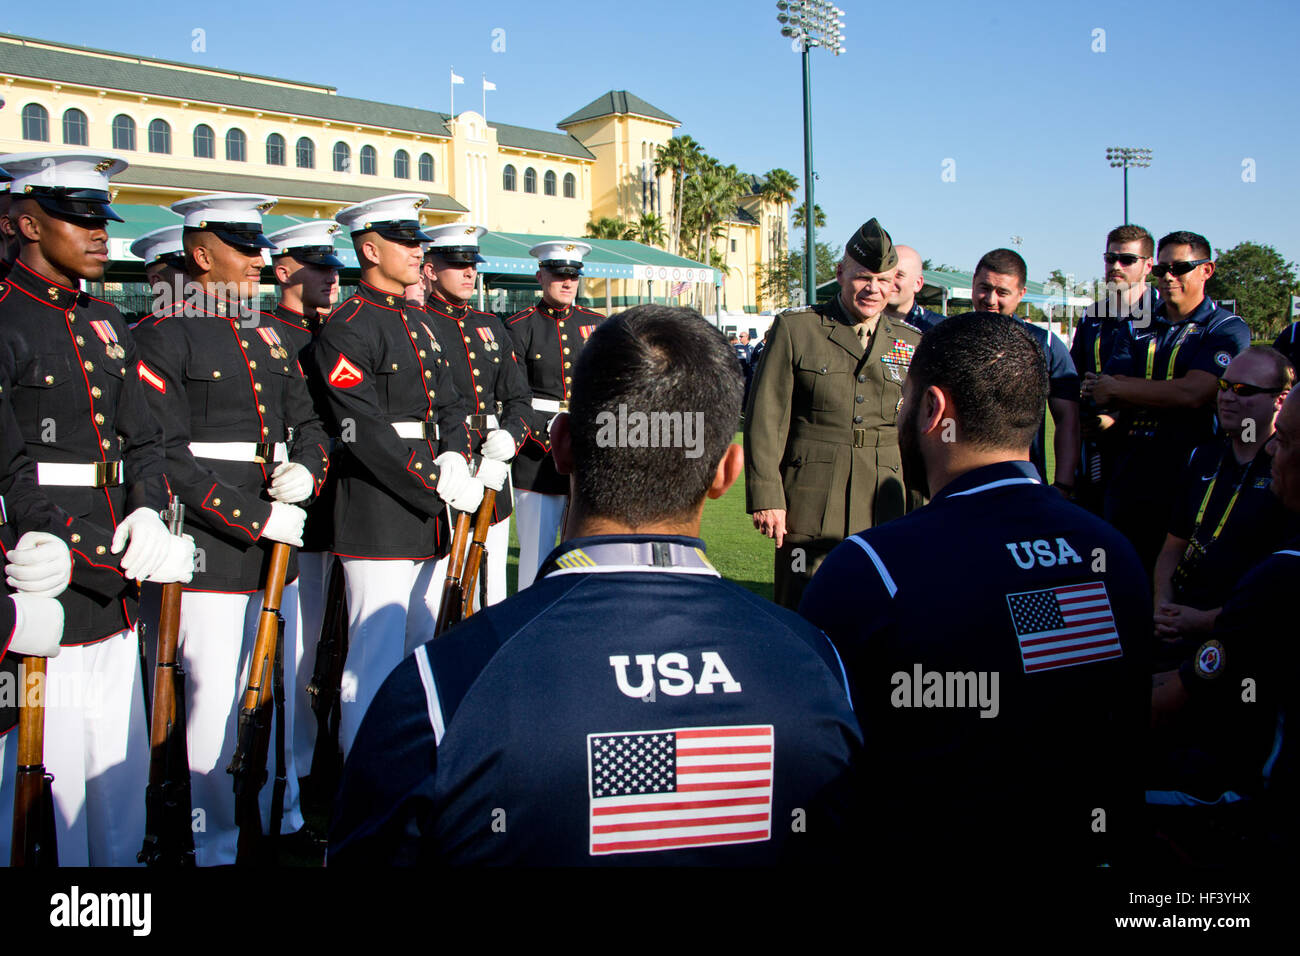 Commandant of the Marine Corps Gen. Robert B. Neller, center right, speaks to Marines with the U.S. Marine Corps Silent Drill Platoon, left, and members of Team USA before the opening ceremony of the Invictus Games at the ESPN Wide World of Sports Complex, Orlando, Fla., May 8, 2016. Team USA has 113 participants competing in 10 adaptive sporting events against 13 other nations. (U.S. Marine Corps photo by Staff Sgt. Gabriela Garcia/Released) CMC at the Invictus Games 160509-M-SA716-036 Stock Photo